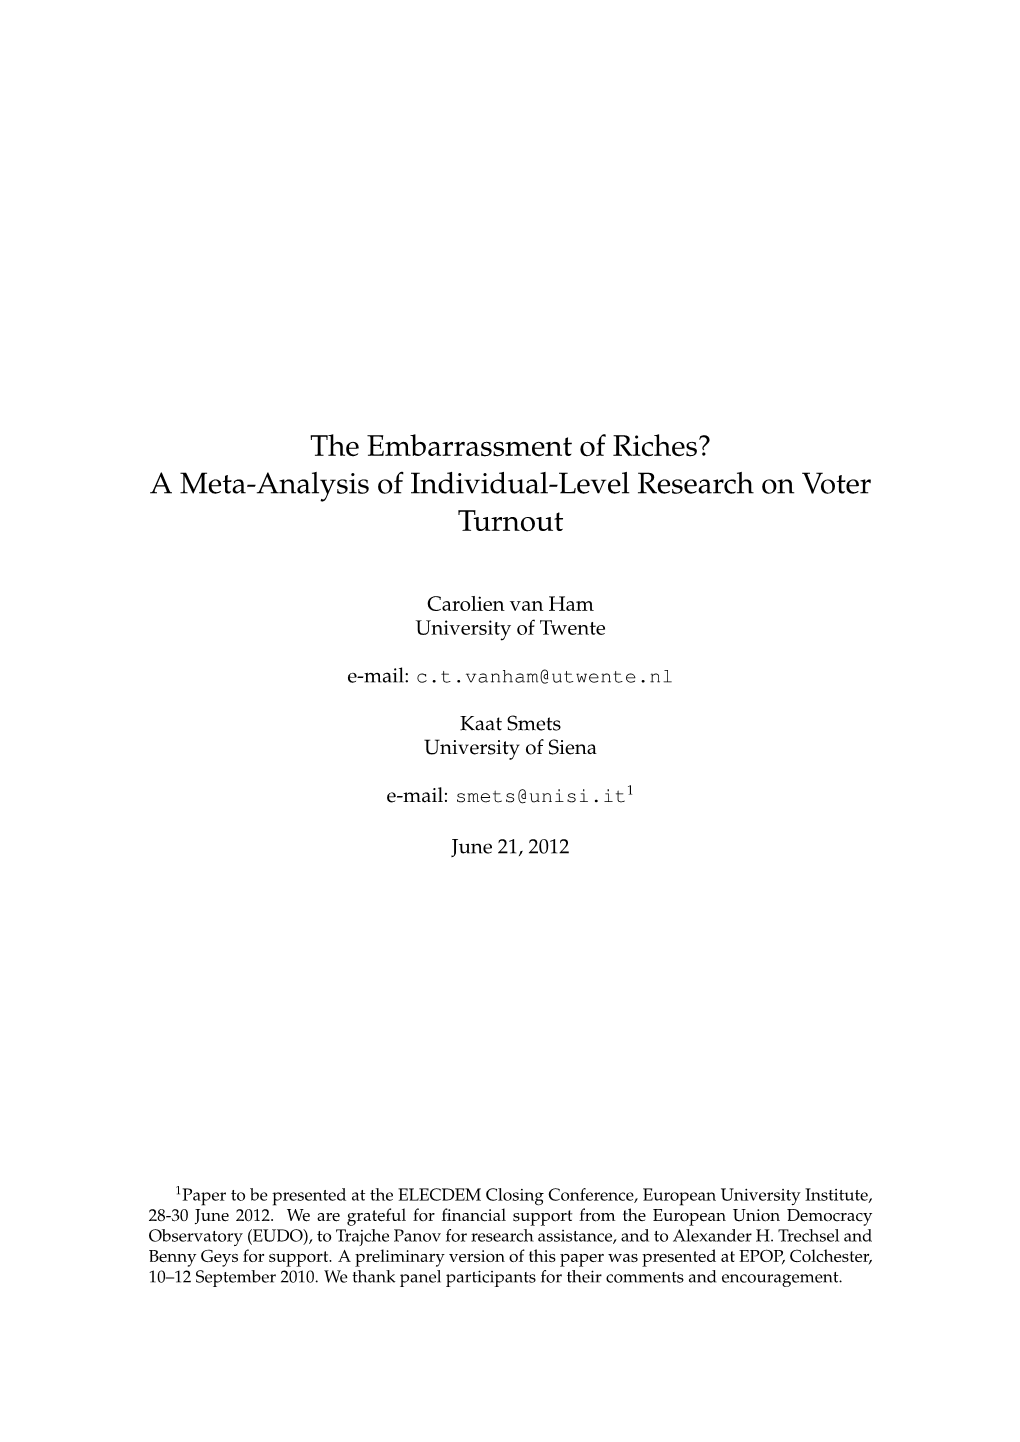 A Meta-Analysis of Individual-Level Research on Voter Turnout